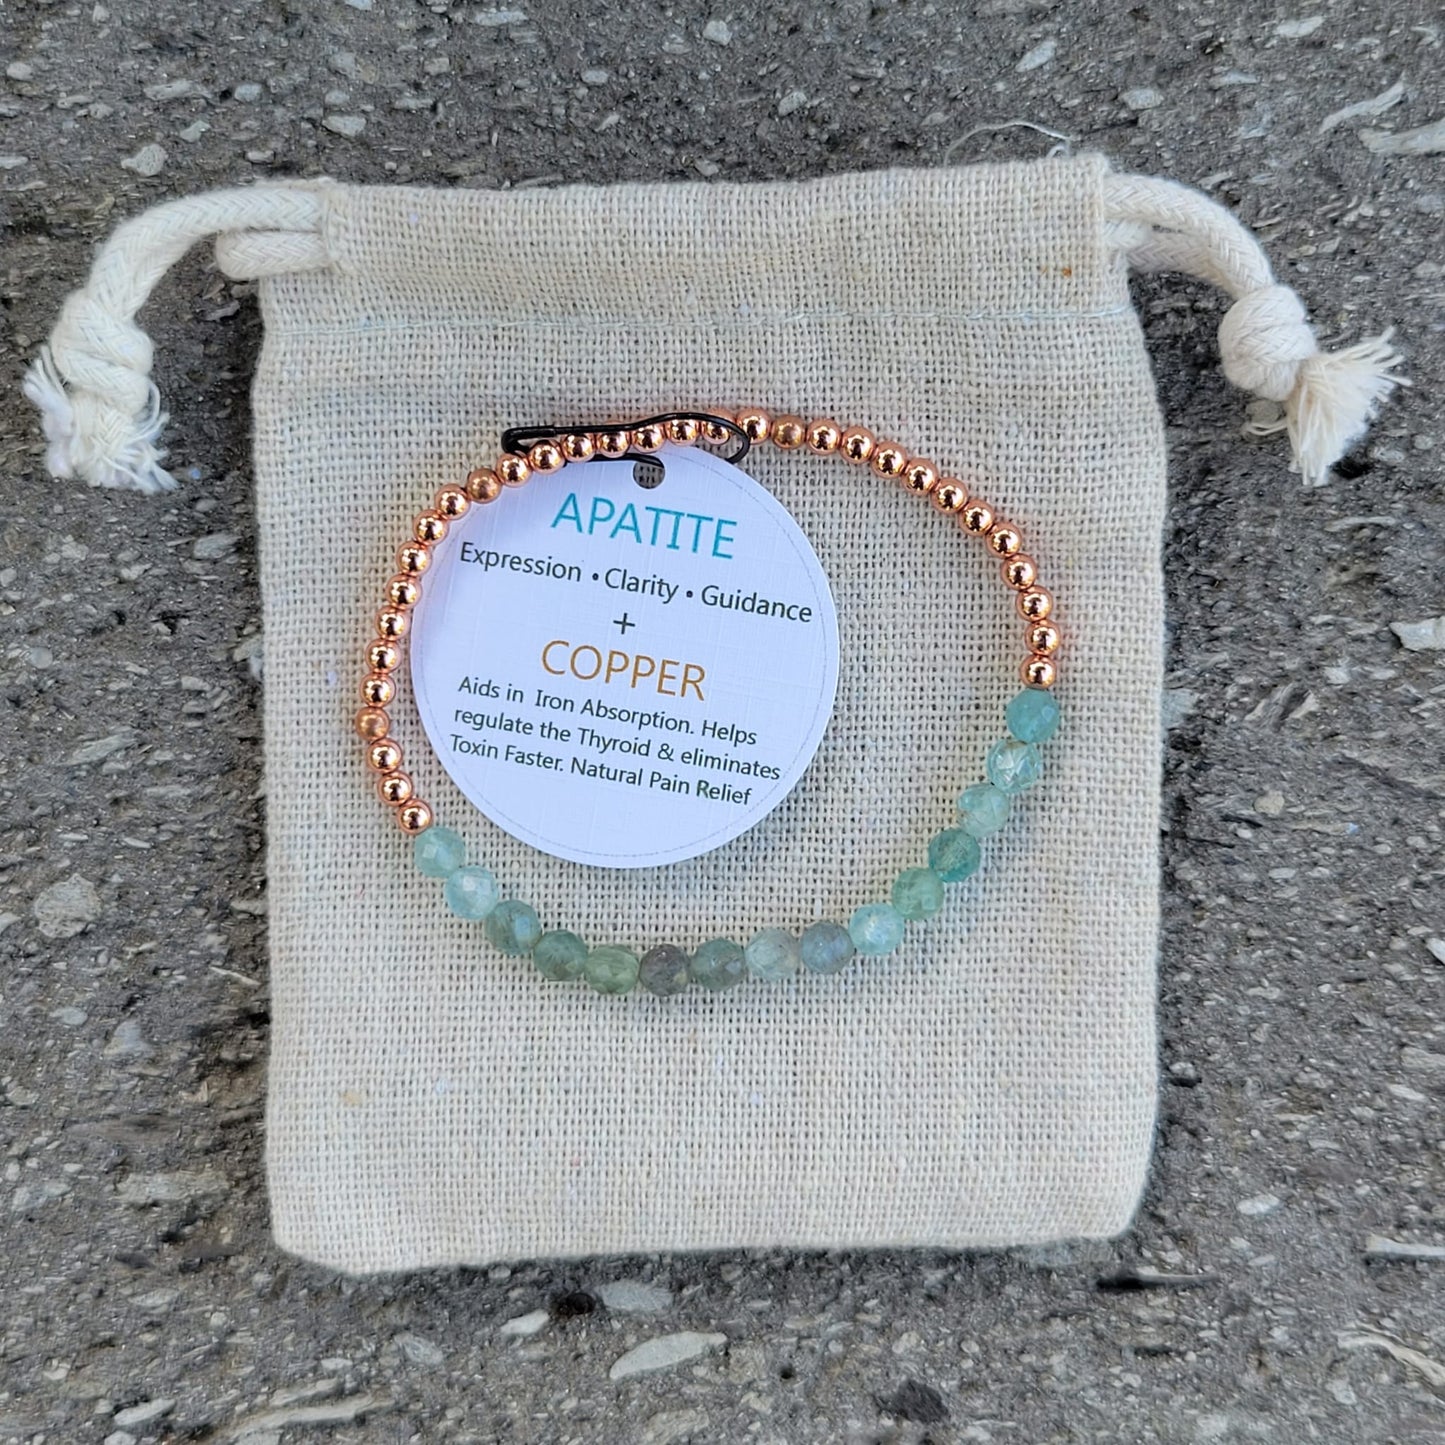 Dainty and Elegant Multi-Faceted Blue Apatite beads + Genuine and solid 3mm Copper Bead Bracelet - Stretchy and Stackable